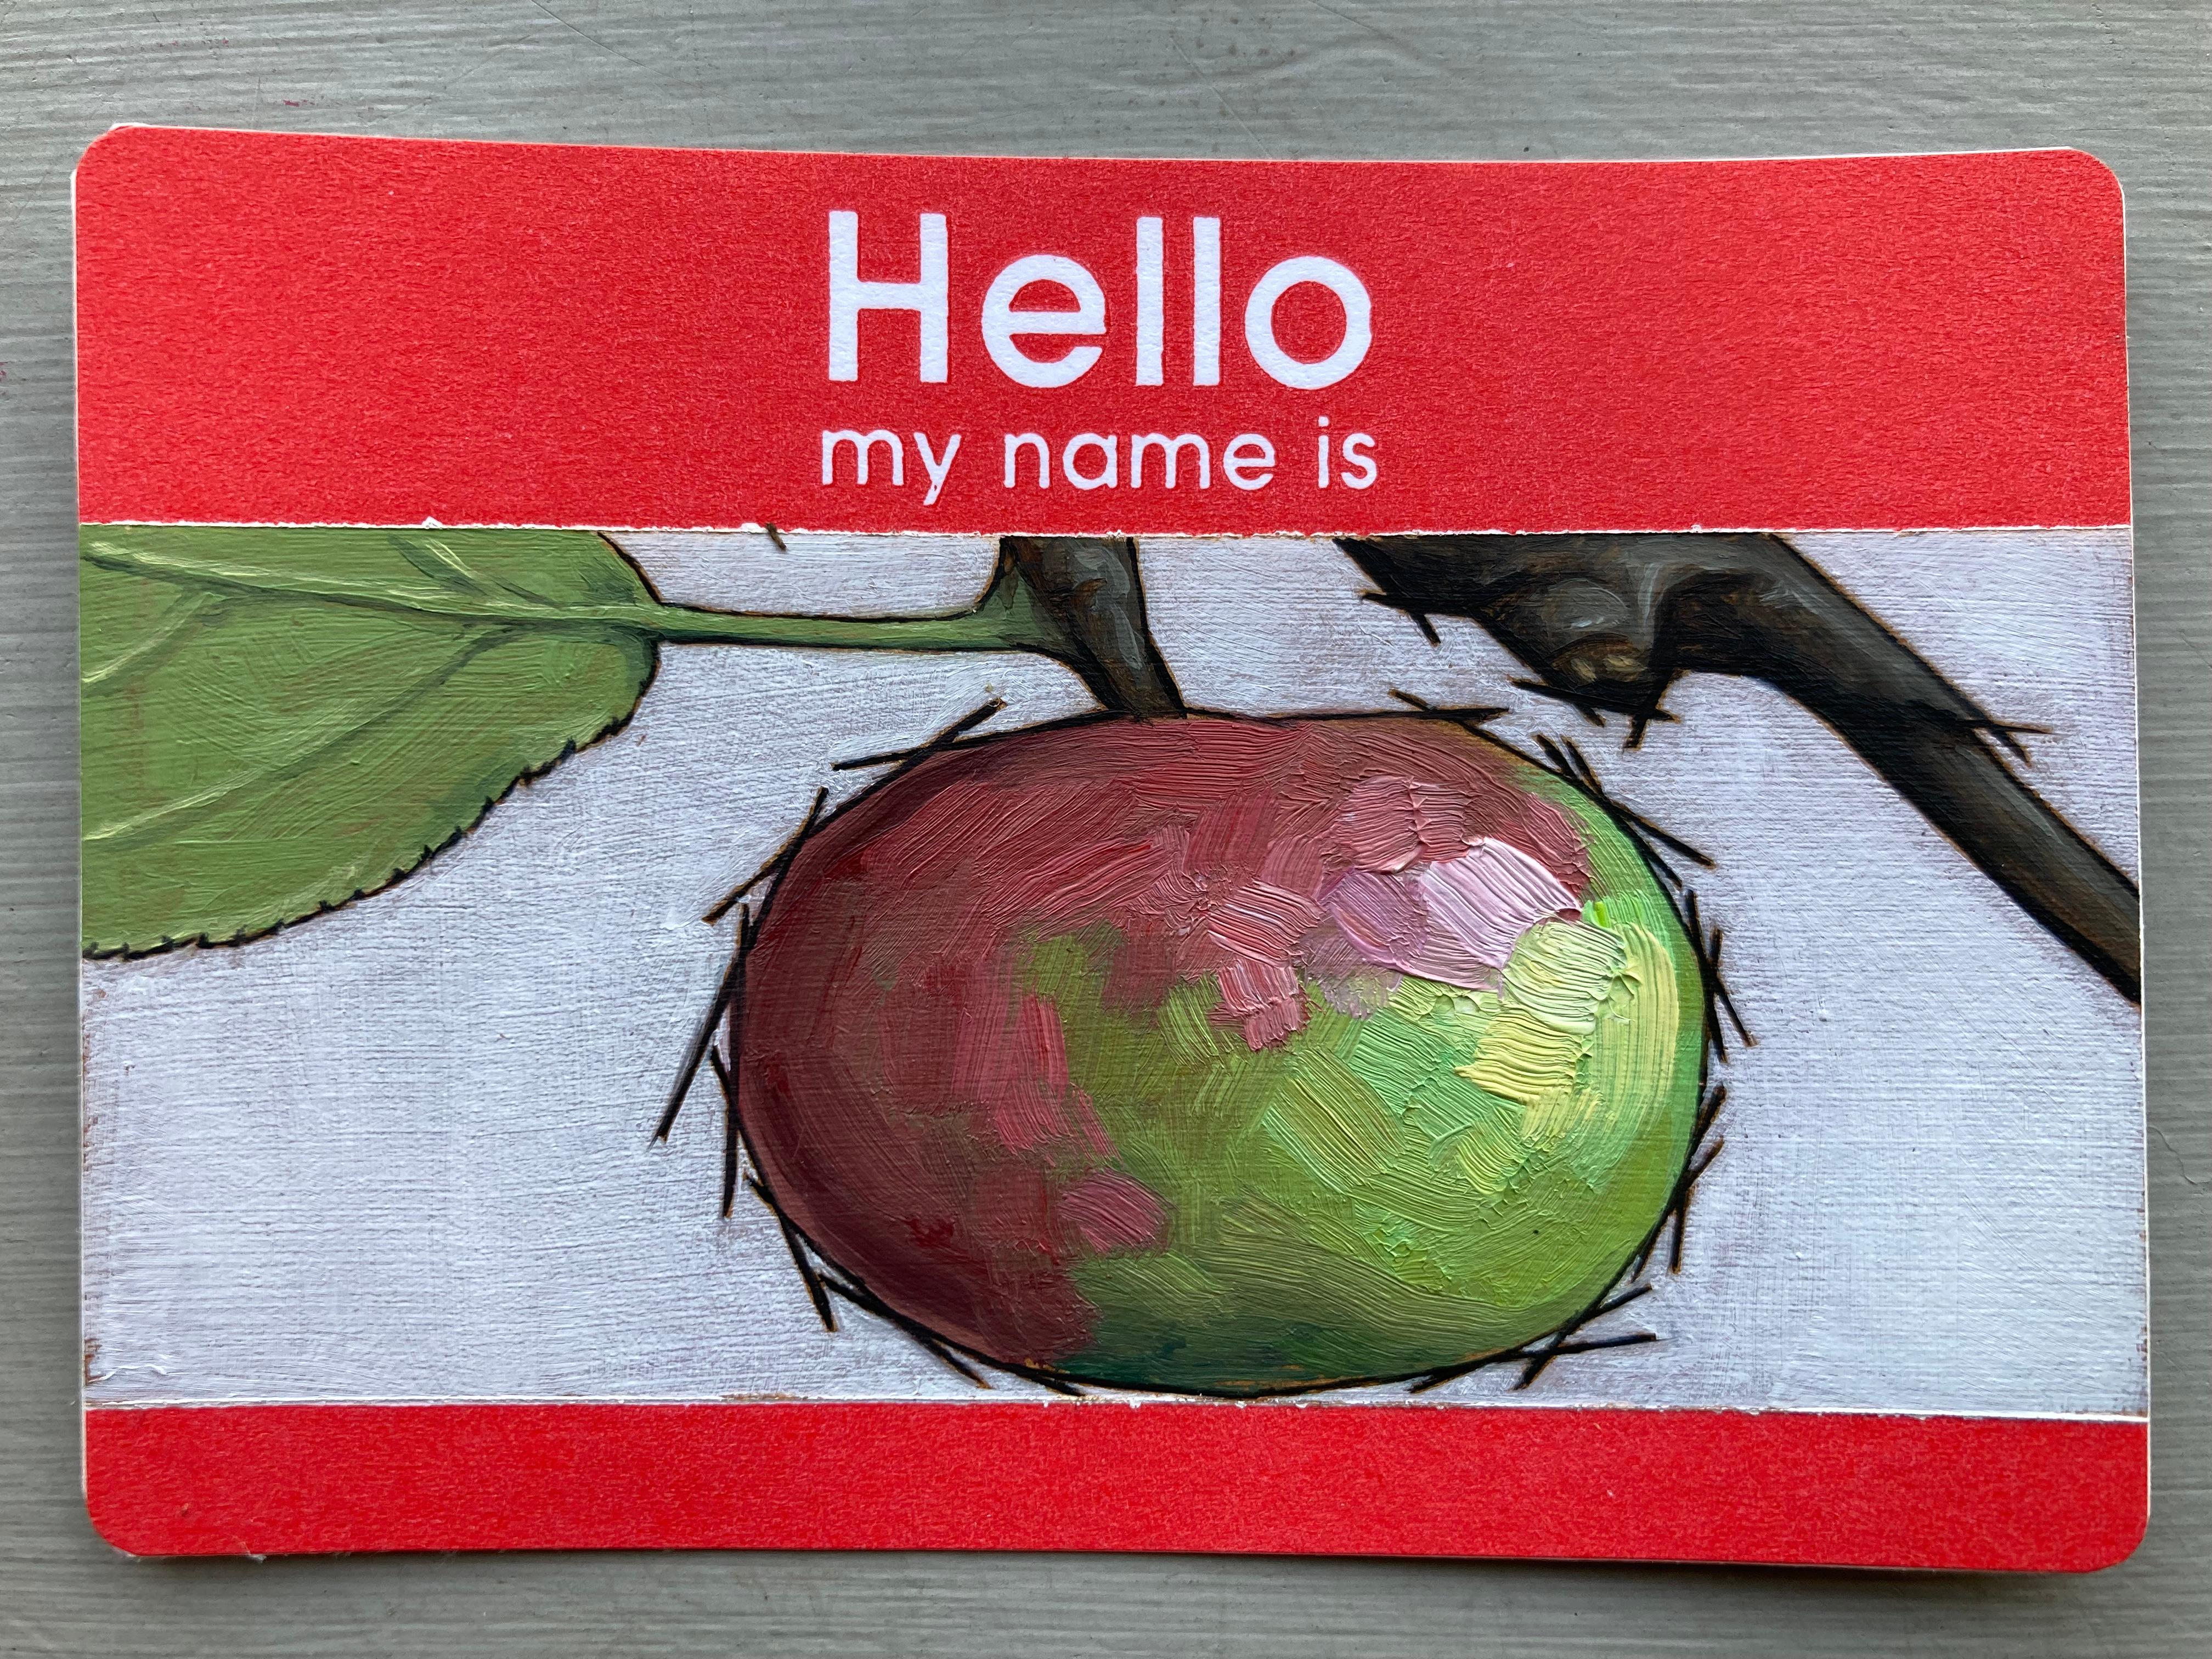 Hello, My Name Is: Crab Apple - miniature pictograph painting on paper - Painting by Anthony Mastromatteo